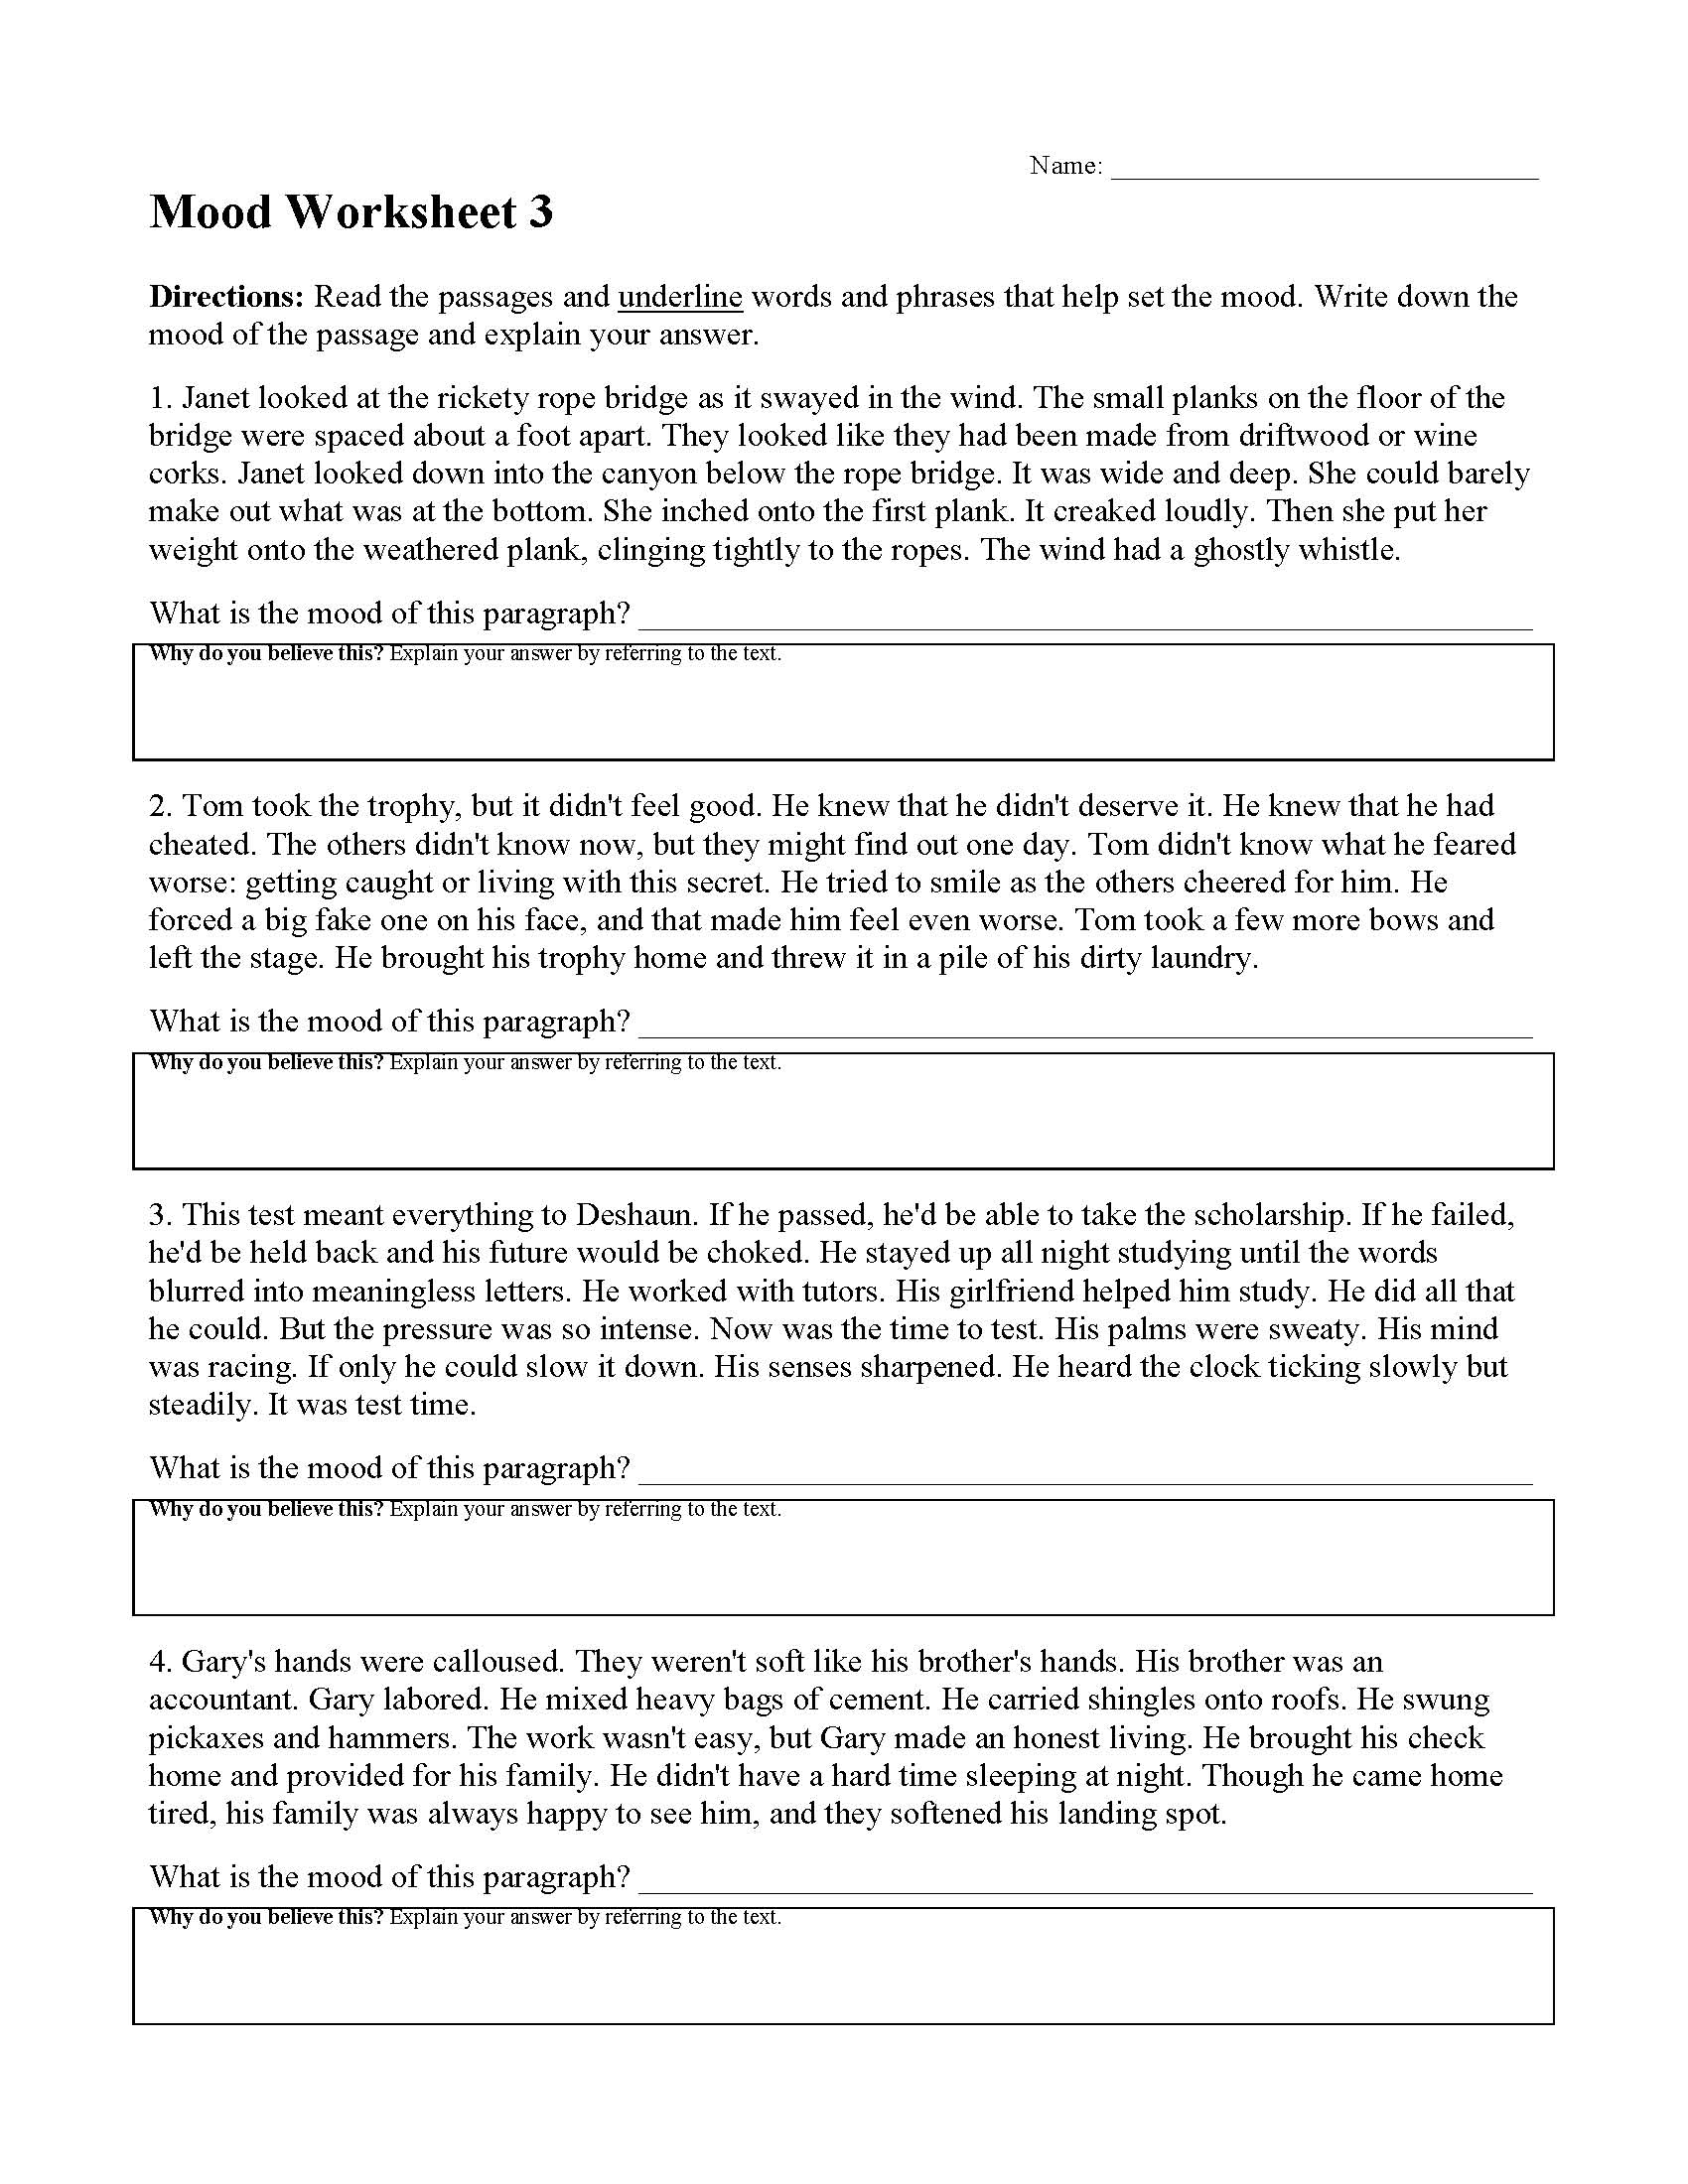 This is a preview image of Mood Worksheet 3. Click on it to enlarge it or view the source file.